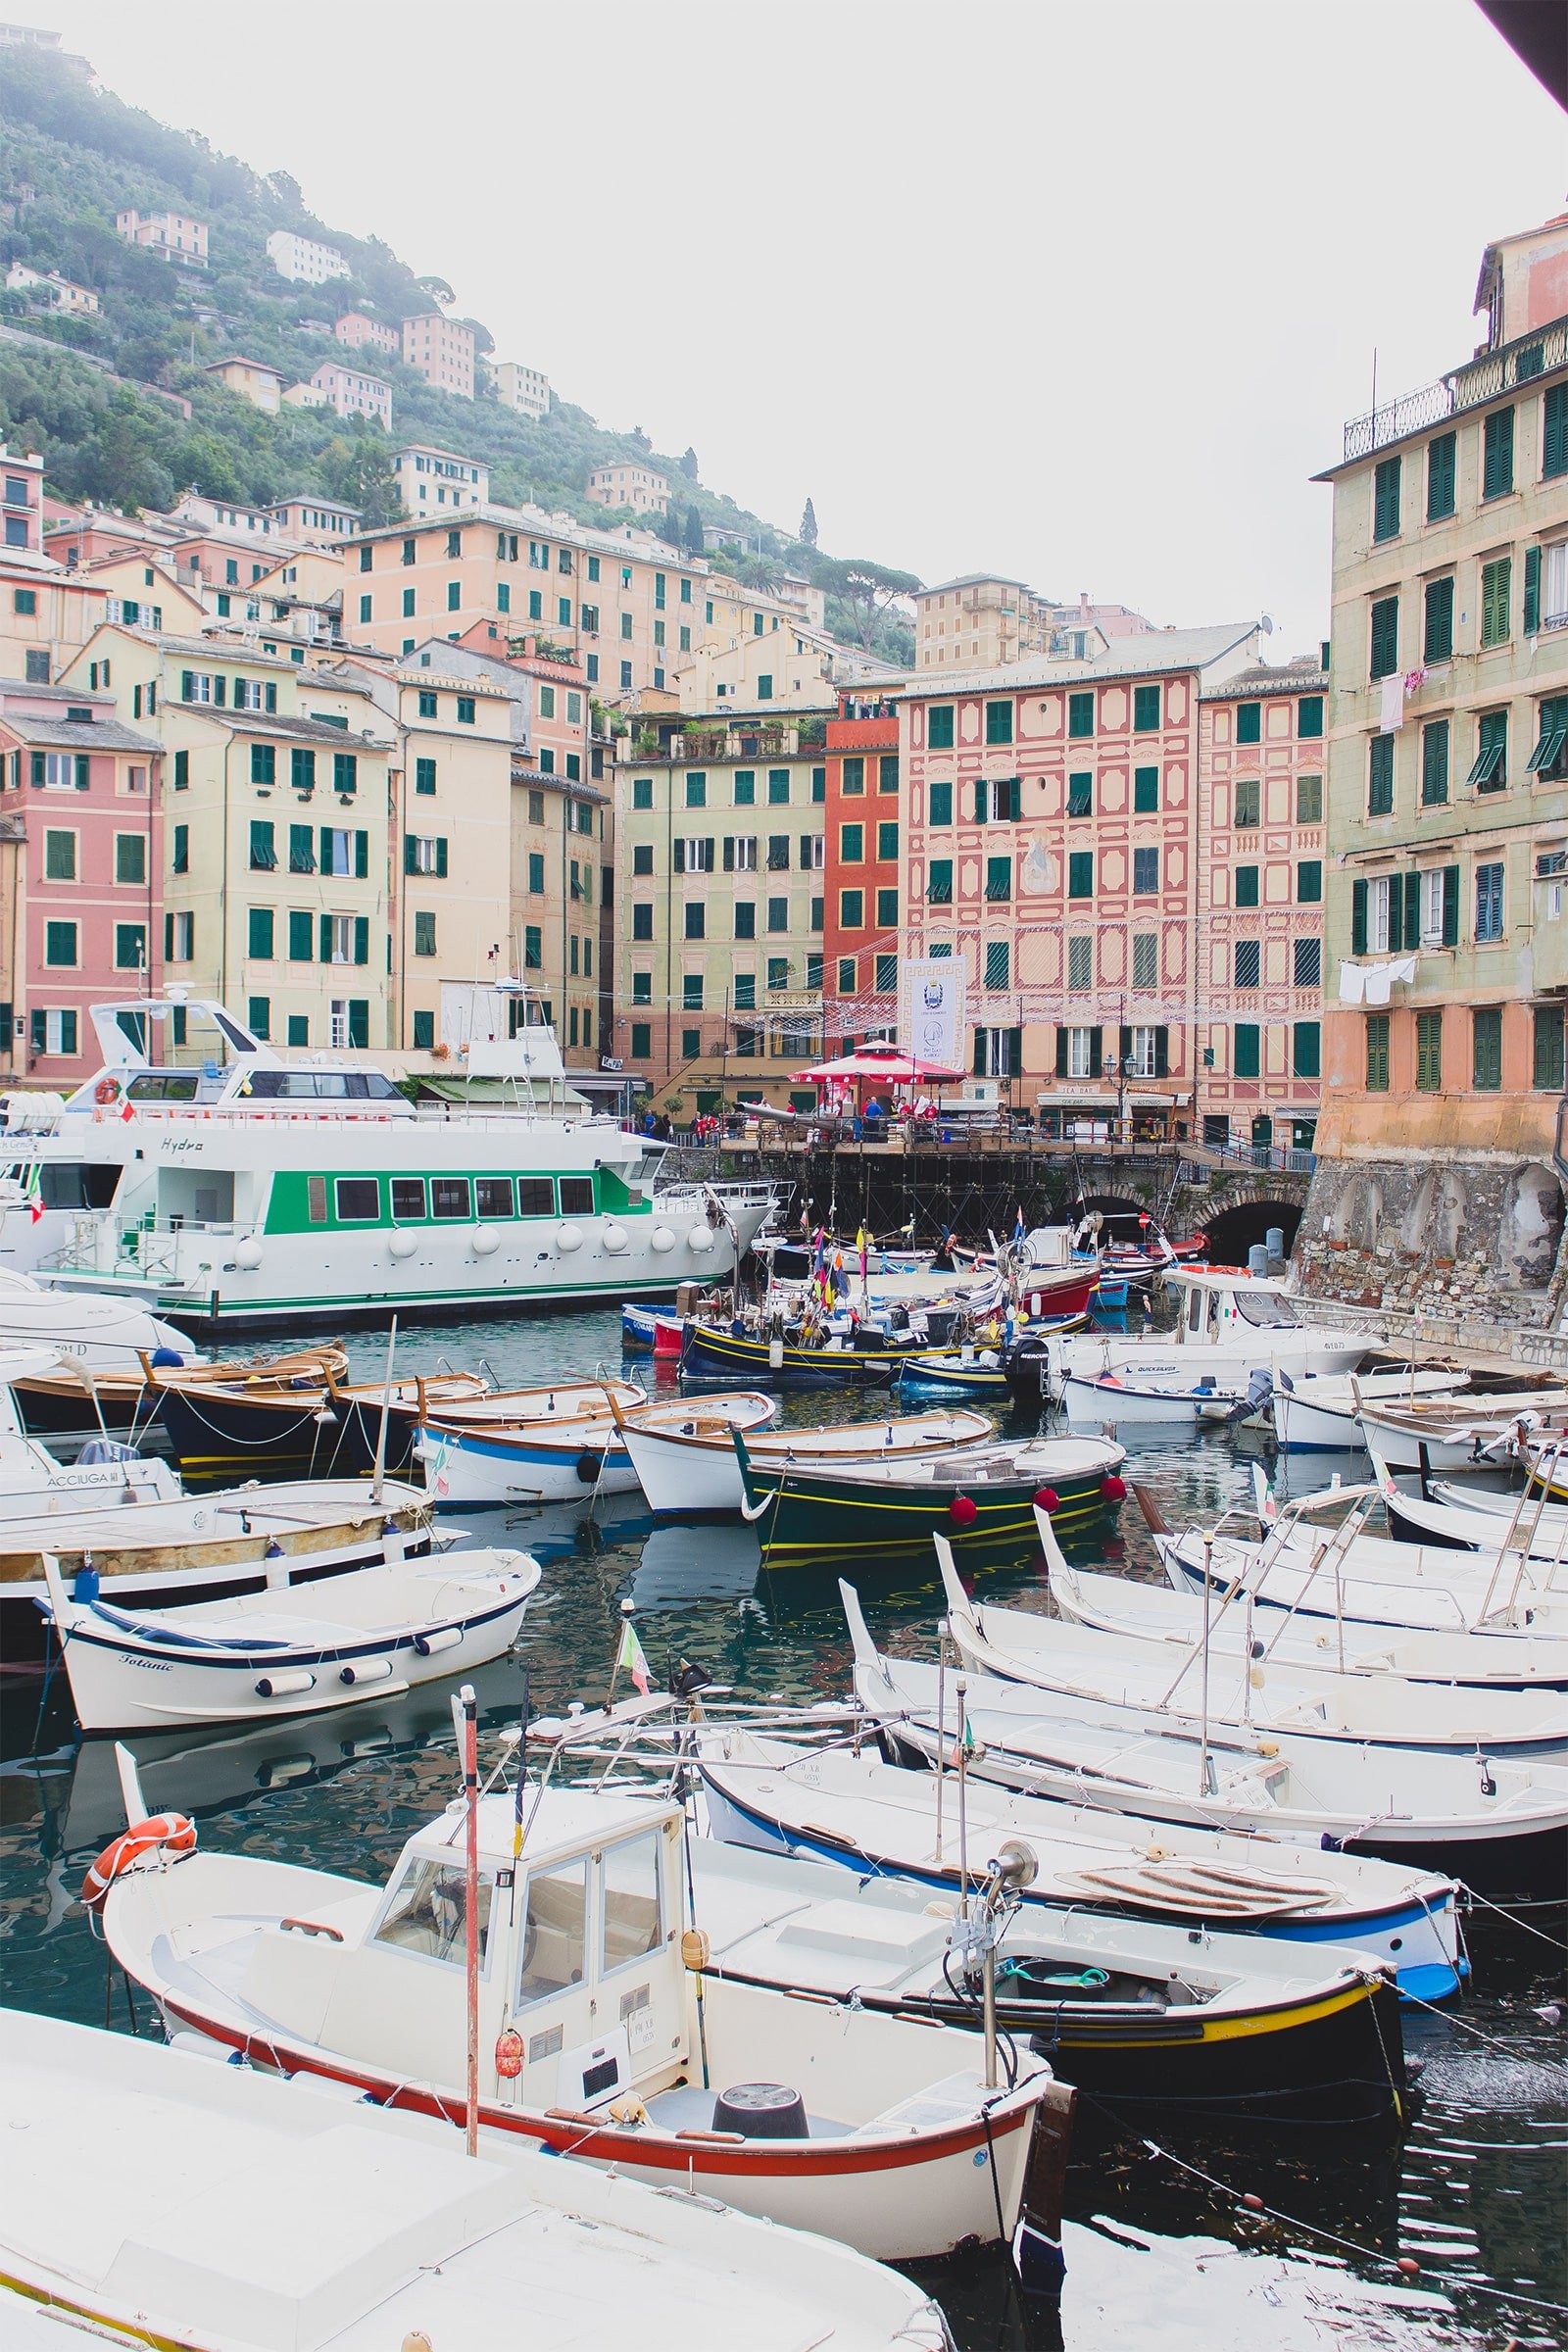 Camogli Fish Festival: The Food Festival You Need To Visit On Your Next Trip To Italy